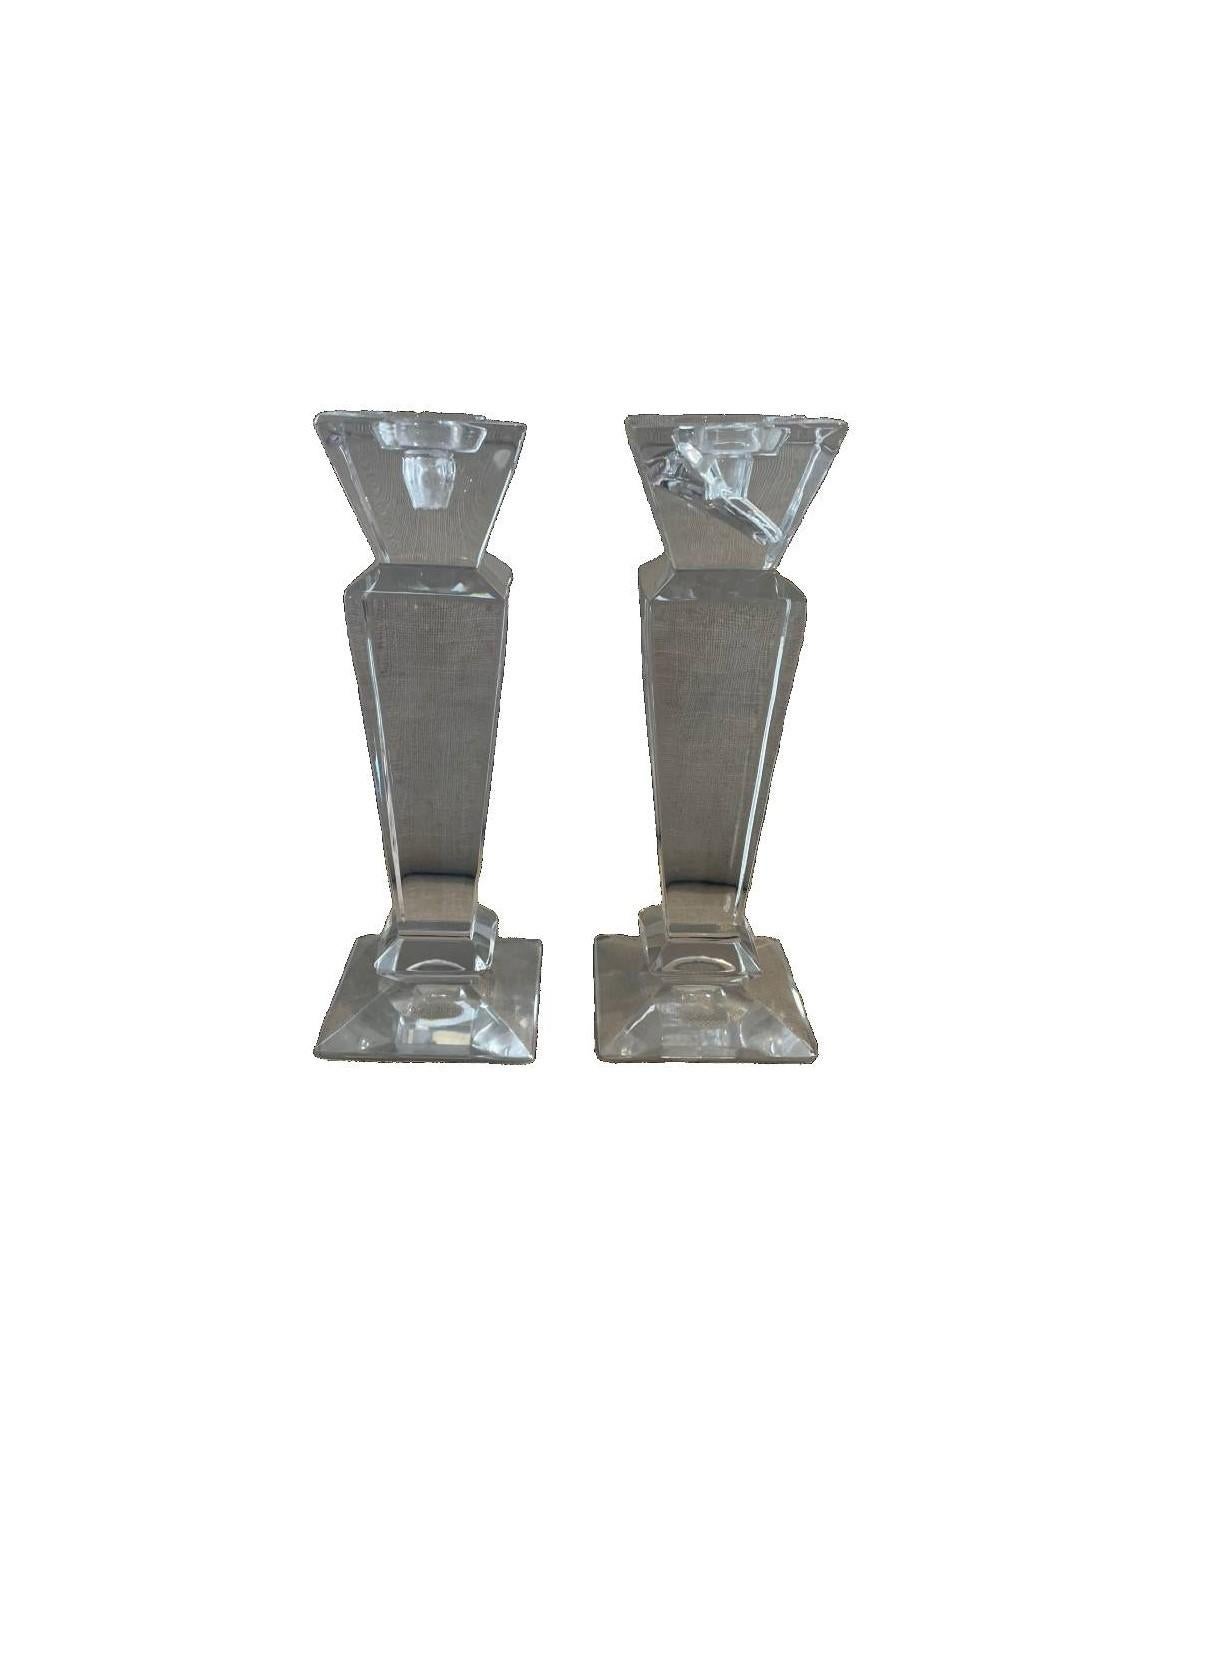 American Classical Pair Mid-century Pressed Glass Candle Holders For Sale